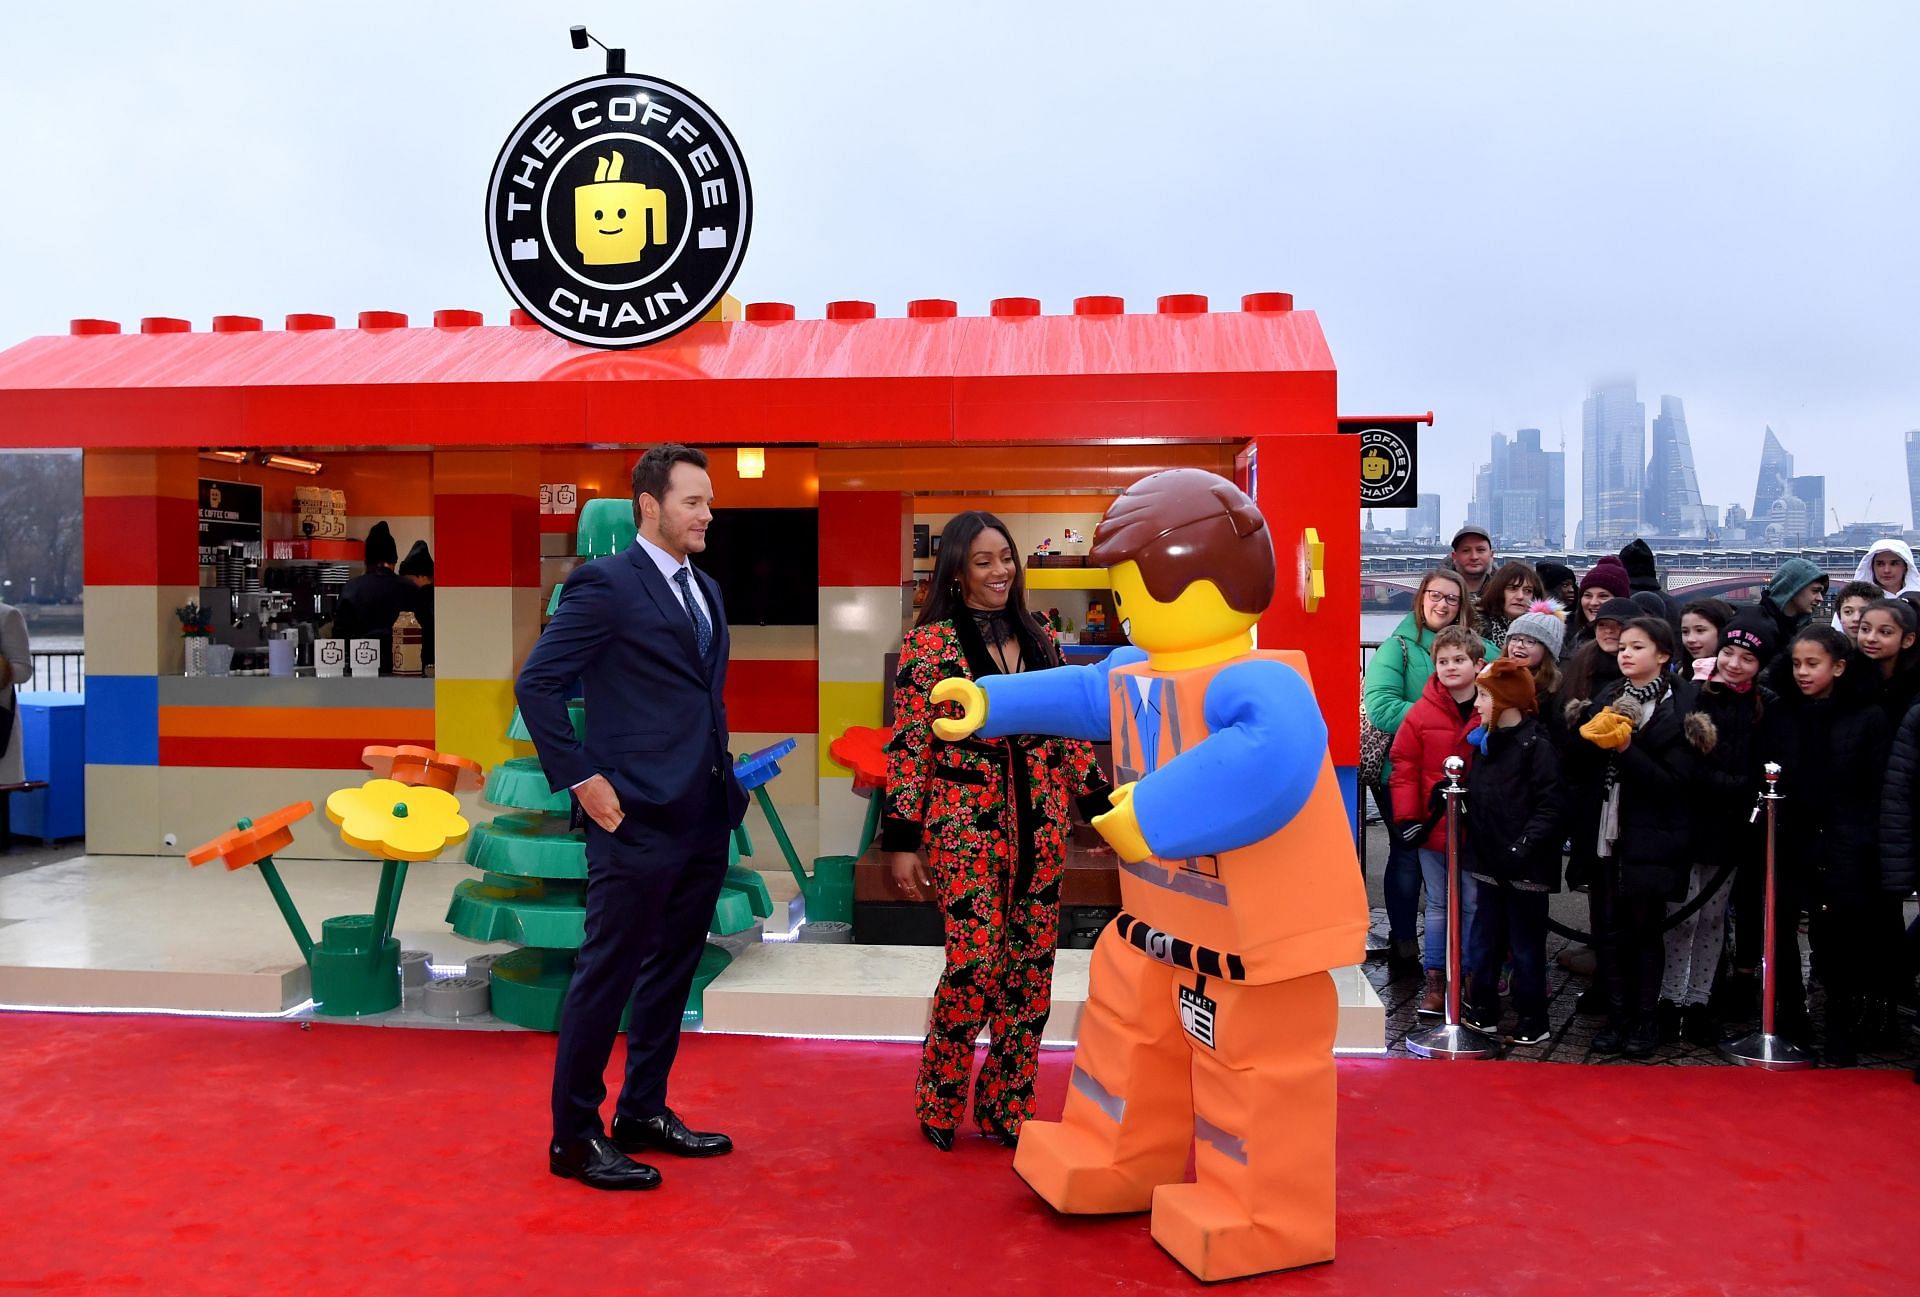 Stars Of &quot;The Lego Movie 2&quot; Open Pop-Up Lego Cafe &quot;The Coffee Chain&quot; (Photo by Gareth Cattermole/Getty Images)